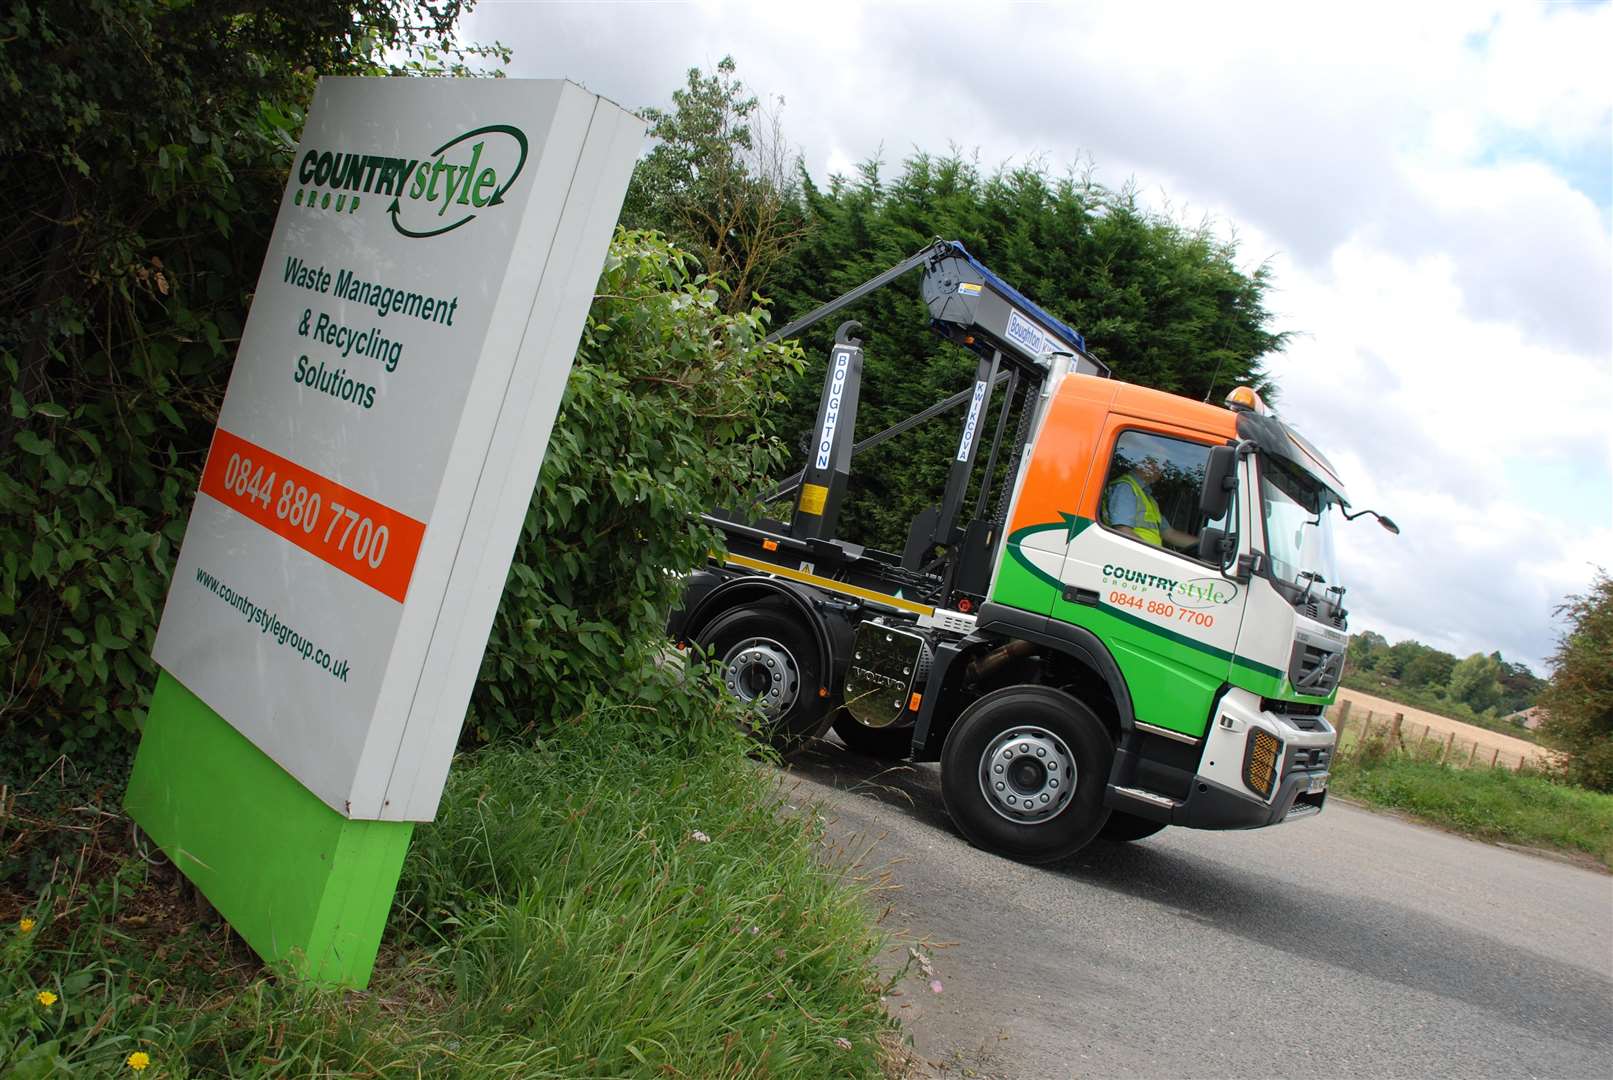 Countrystyle Recycling in Lenham was targeted